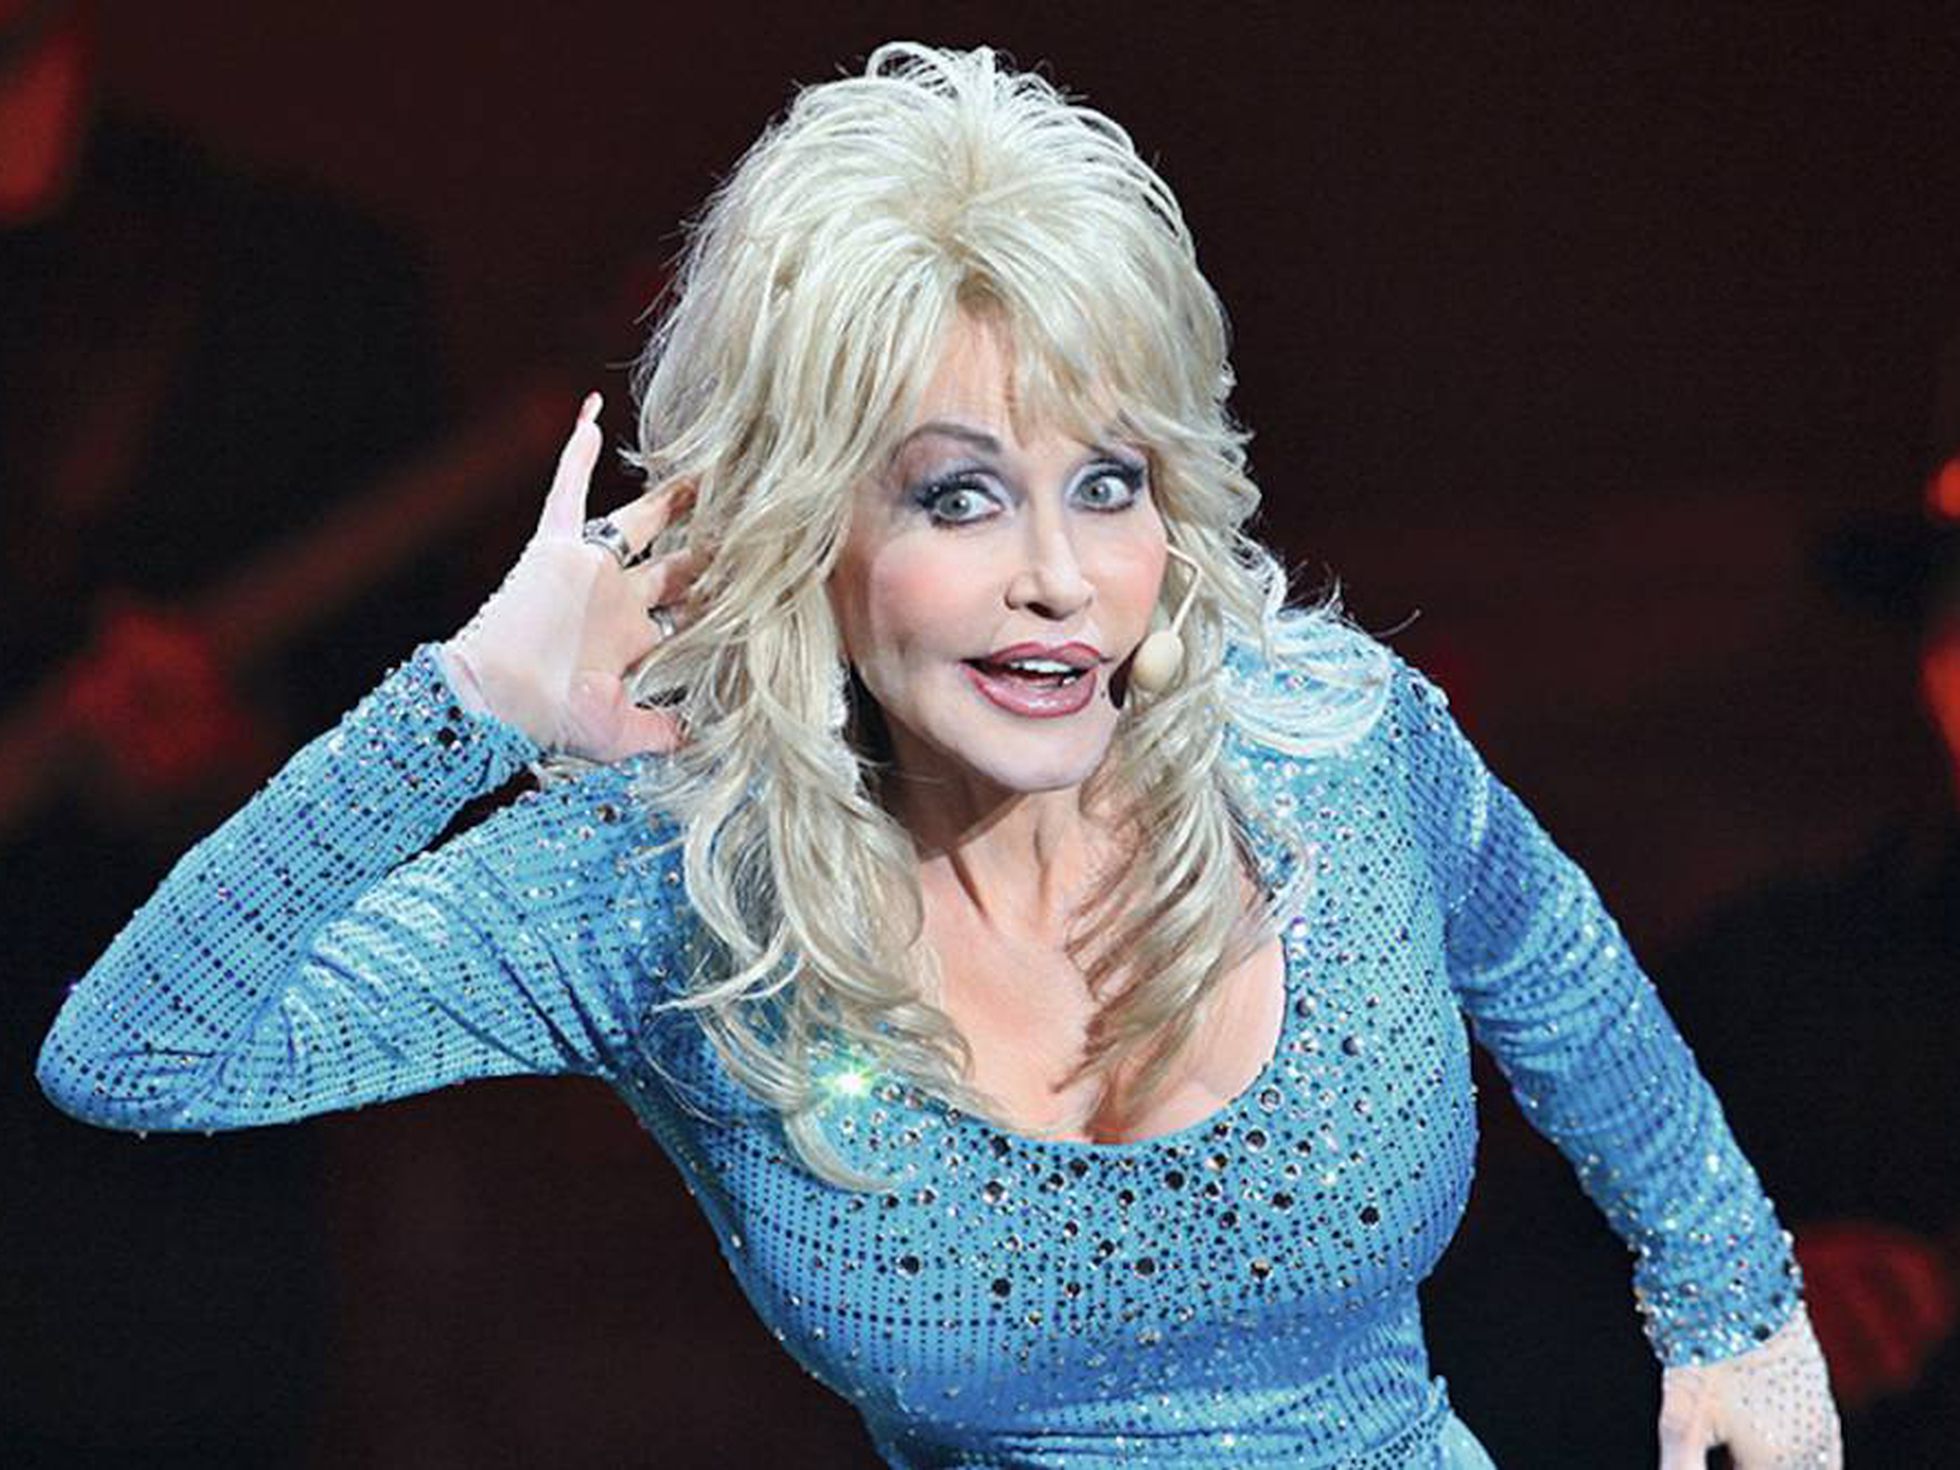  dolly parton in show